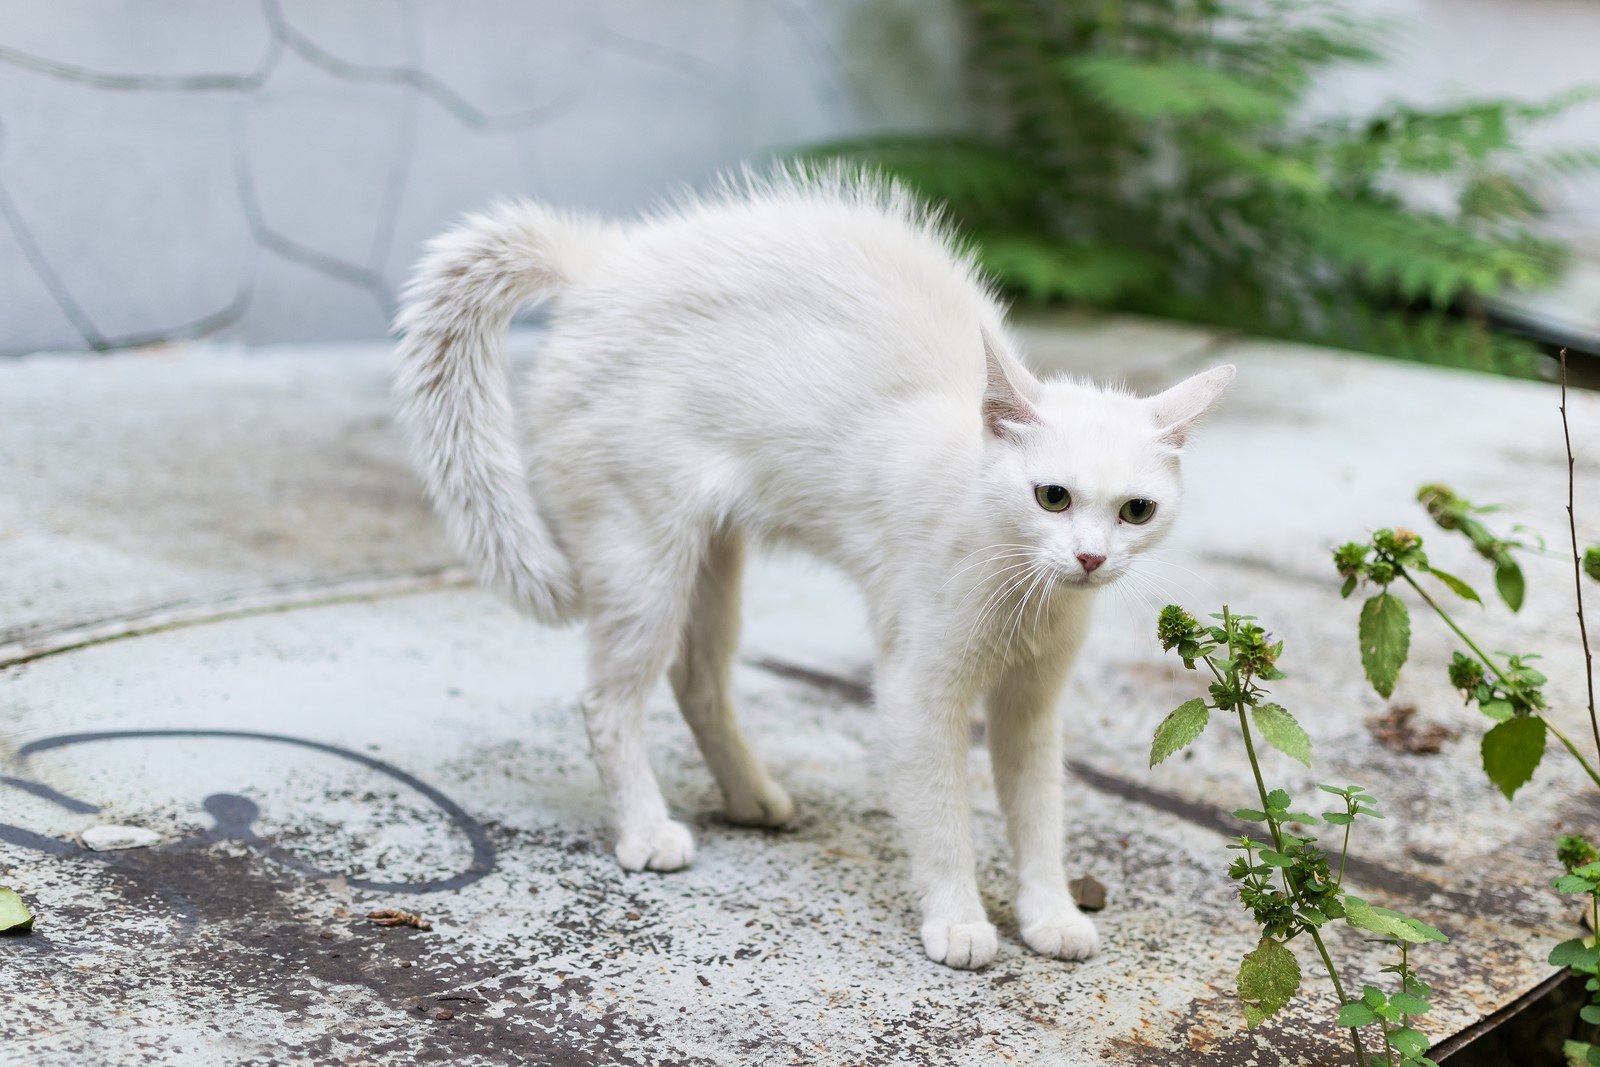 A Guide to Approaching Stray Cats Safely